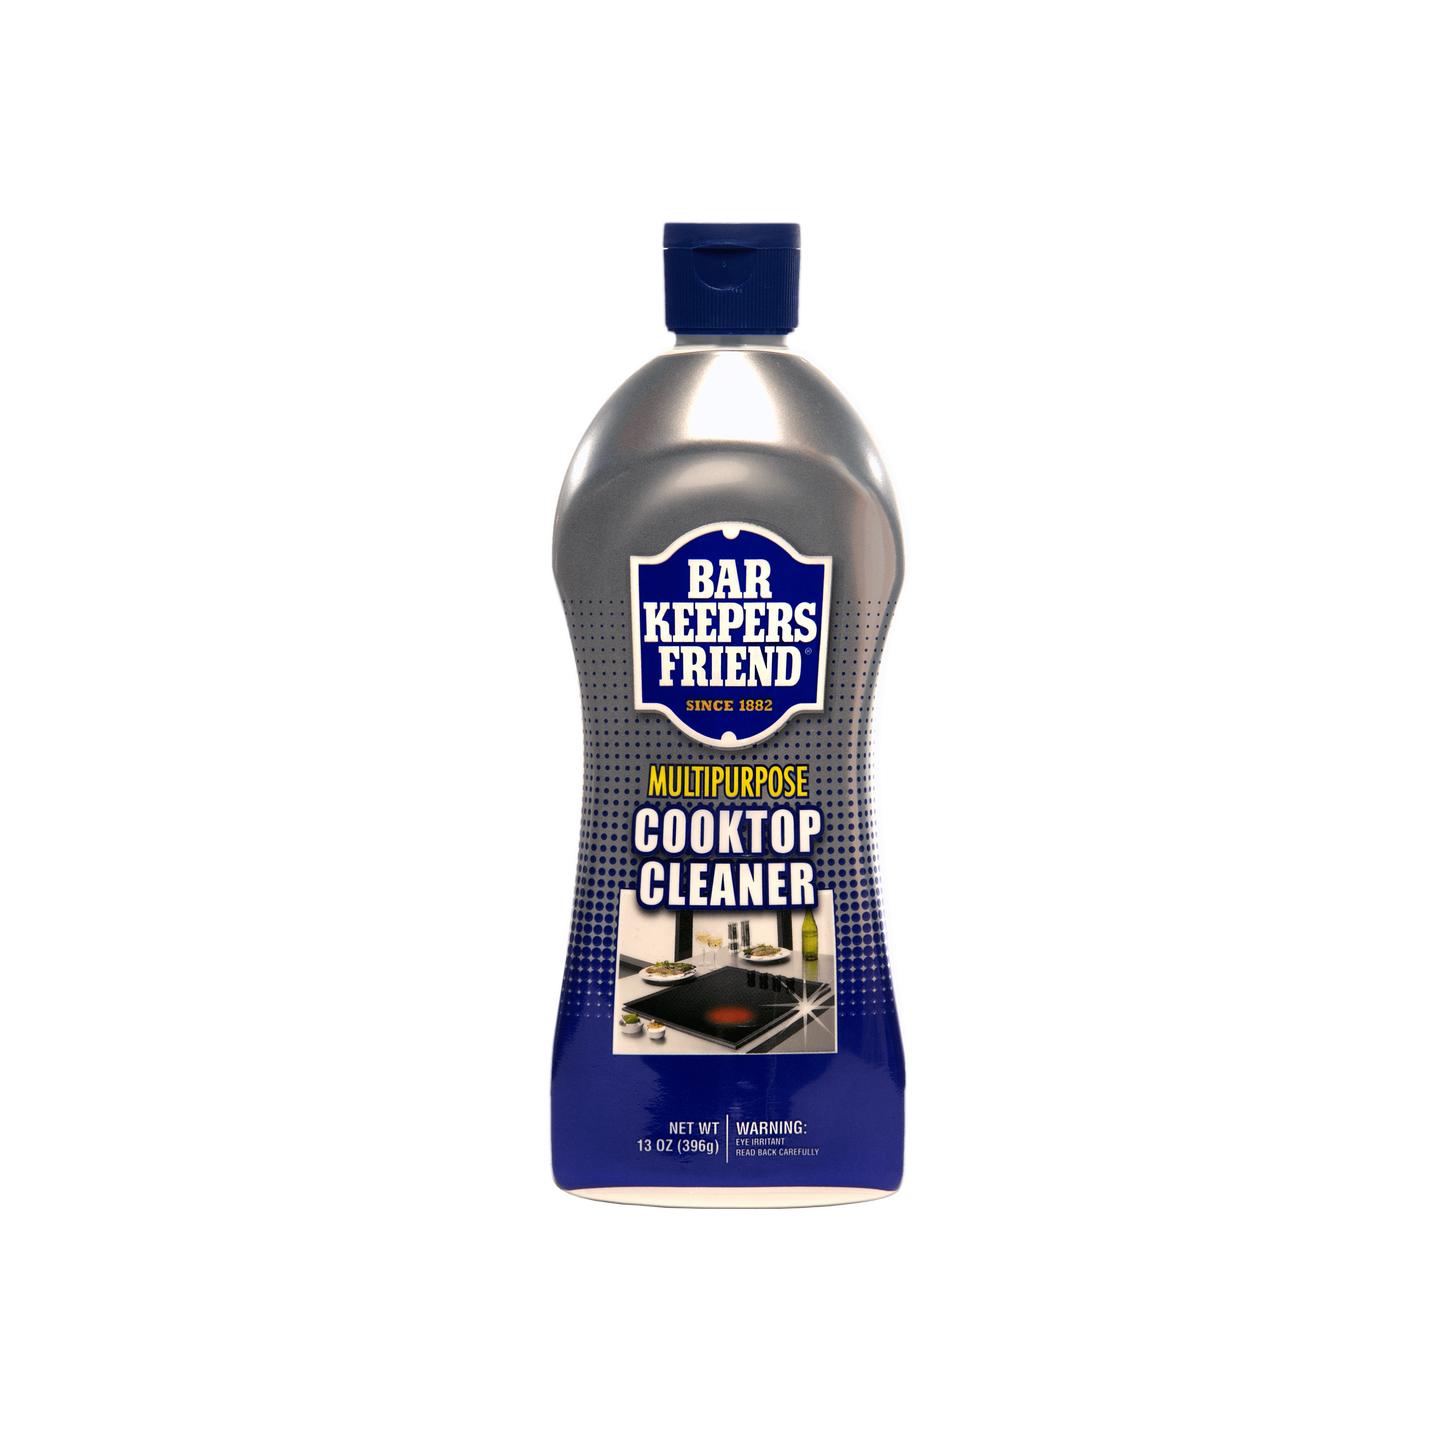 Bar Keepers Friend Cooktop Cleaner - Home Gadgets